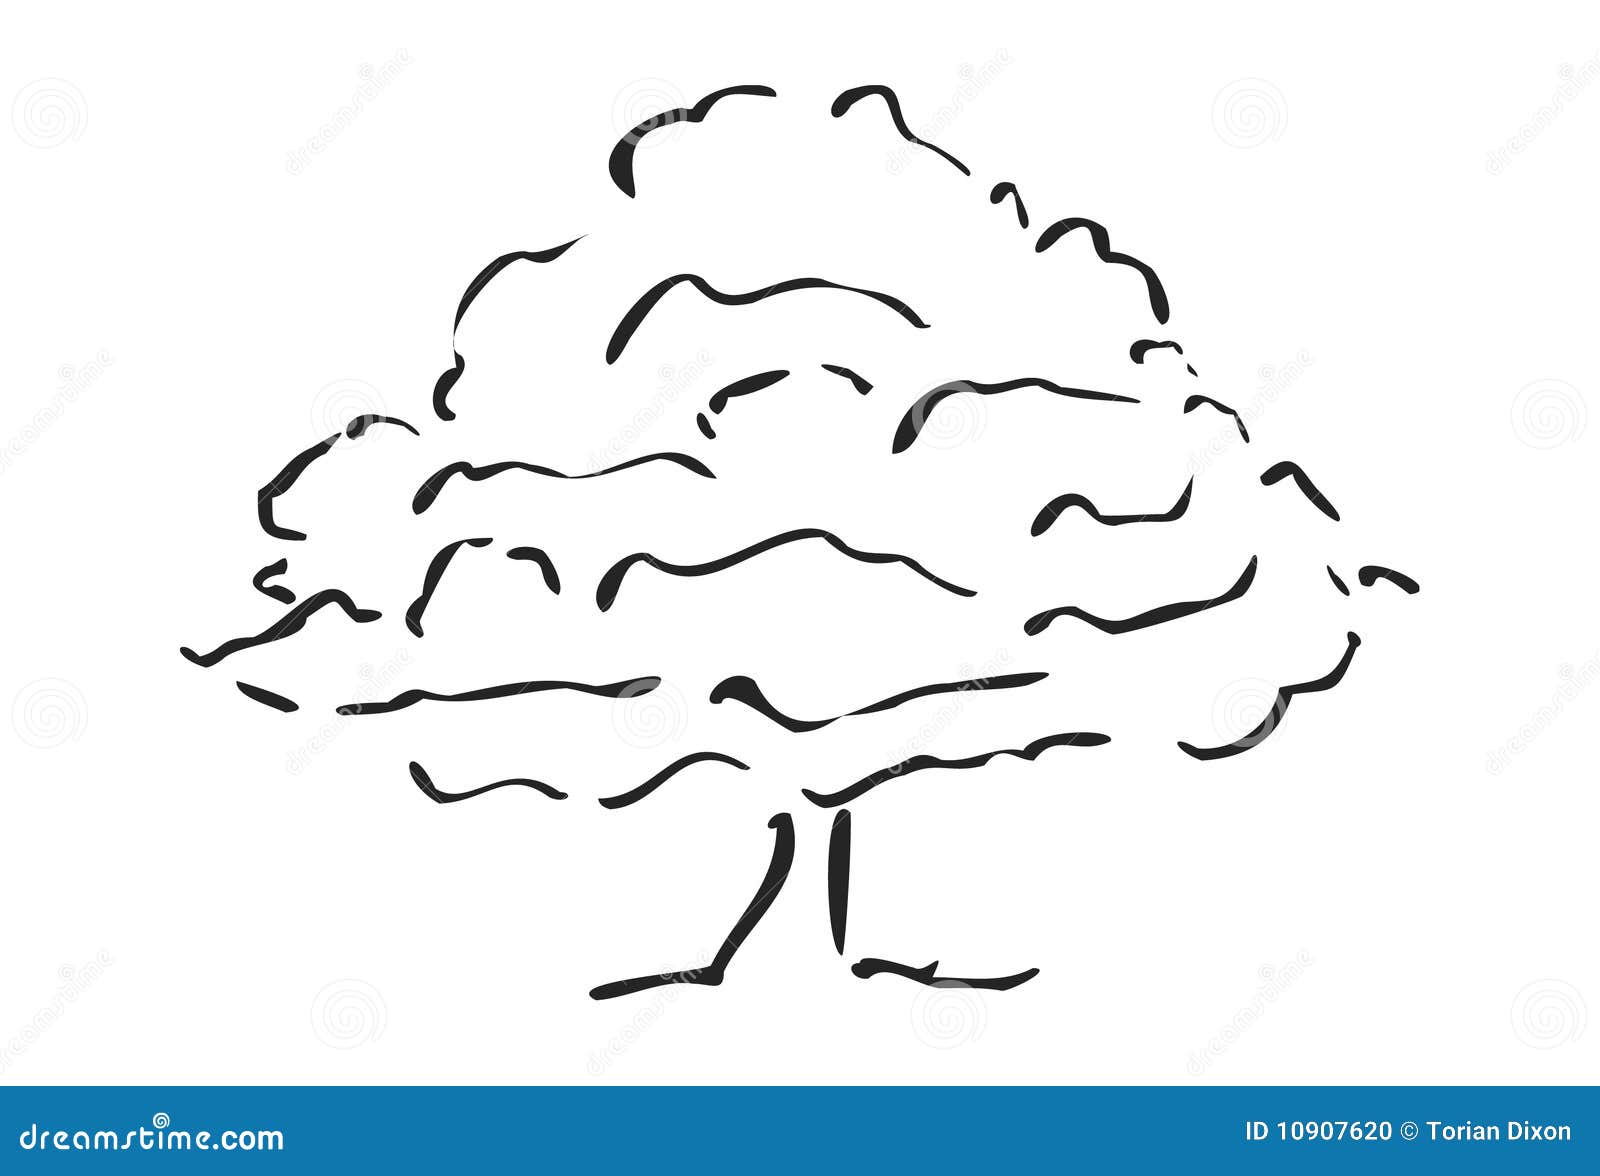 Tree Sketch Stock Vector Illustration Of Foliage Black 10907620 Fast color sketch of a tree in spring. dreamstime com